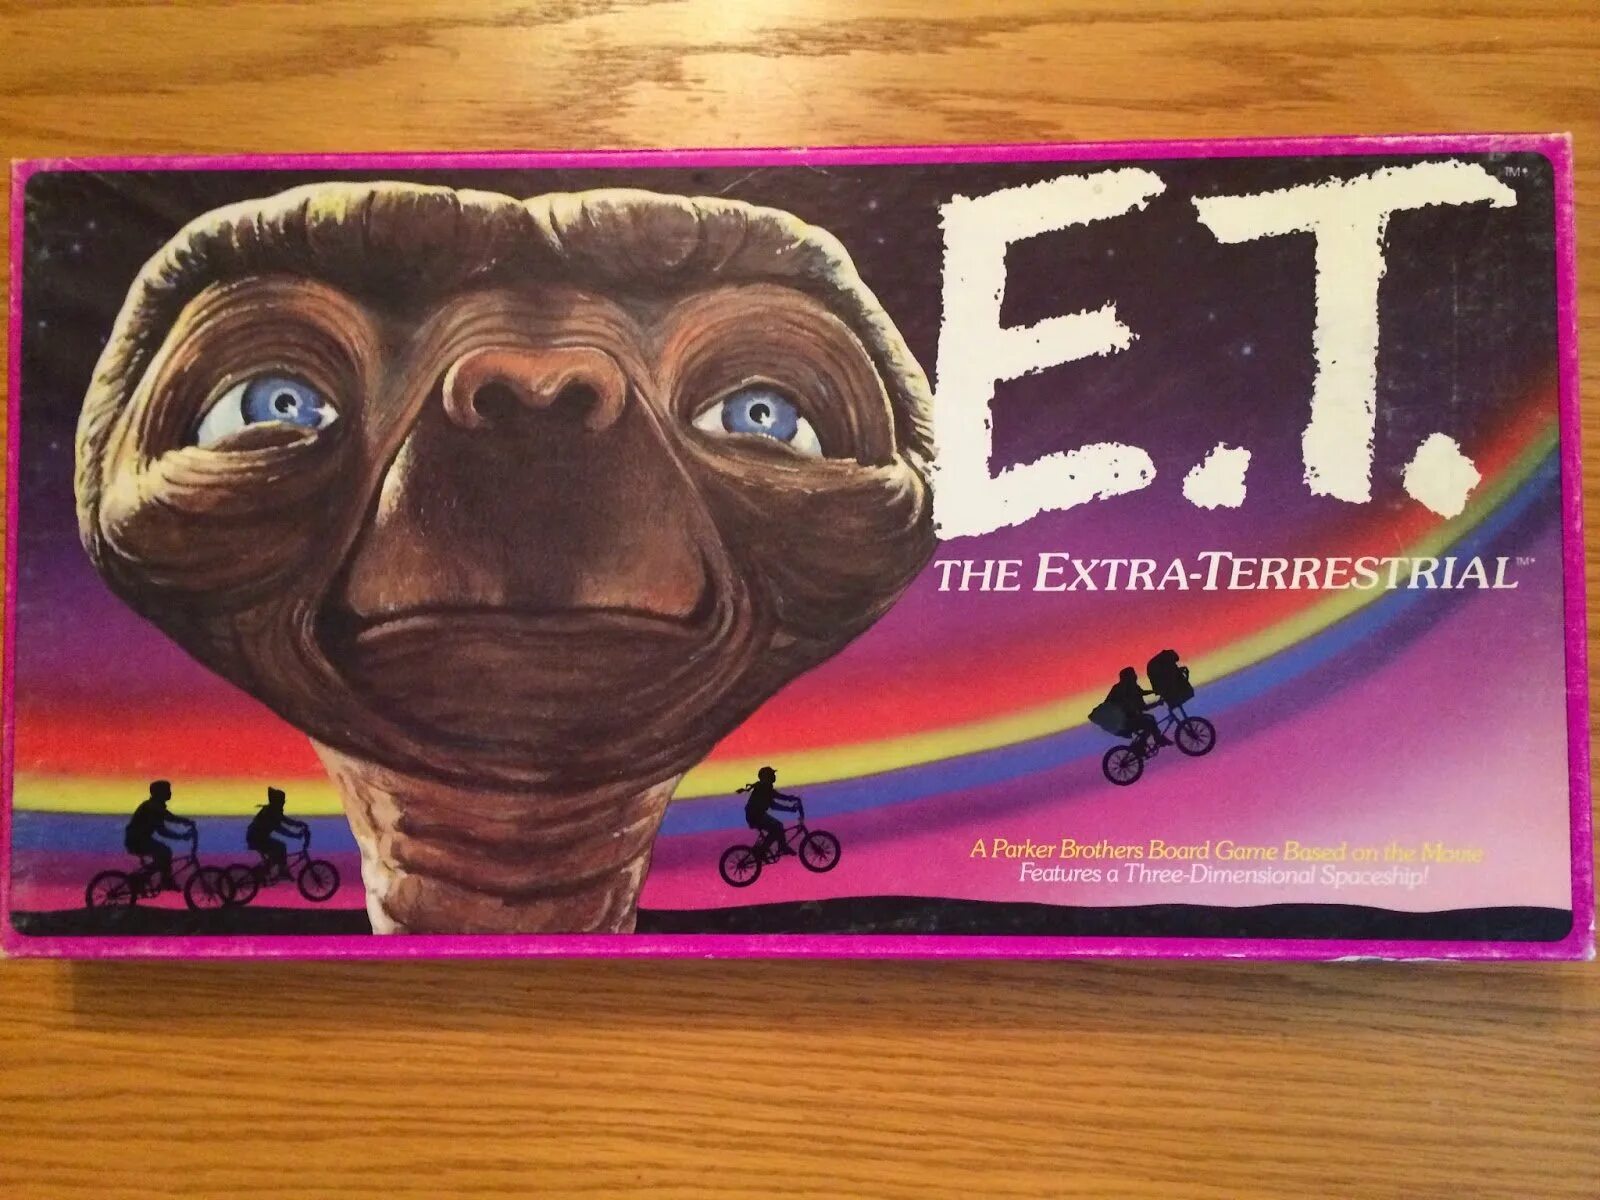 The extra years are. Et the Extra-Terrestrial игра. Et 1982 игра. E.T. the Extra-Terrestrial game. Et the Extra-Terrestrial Adventure game.